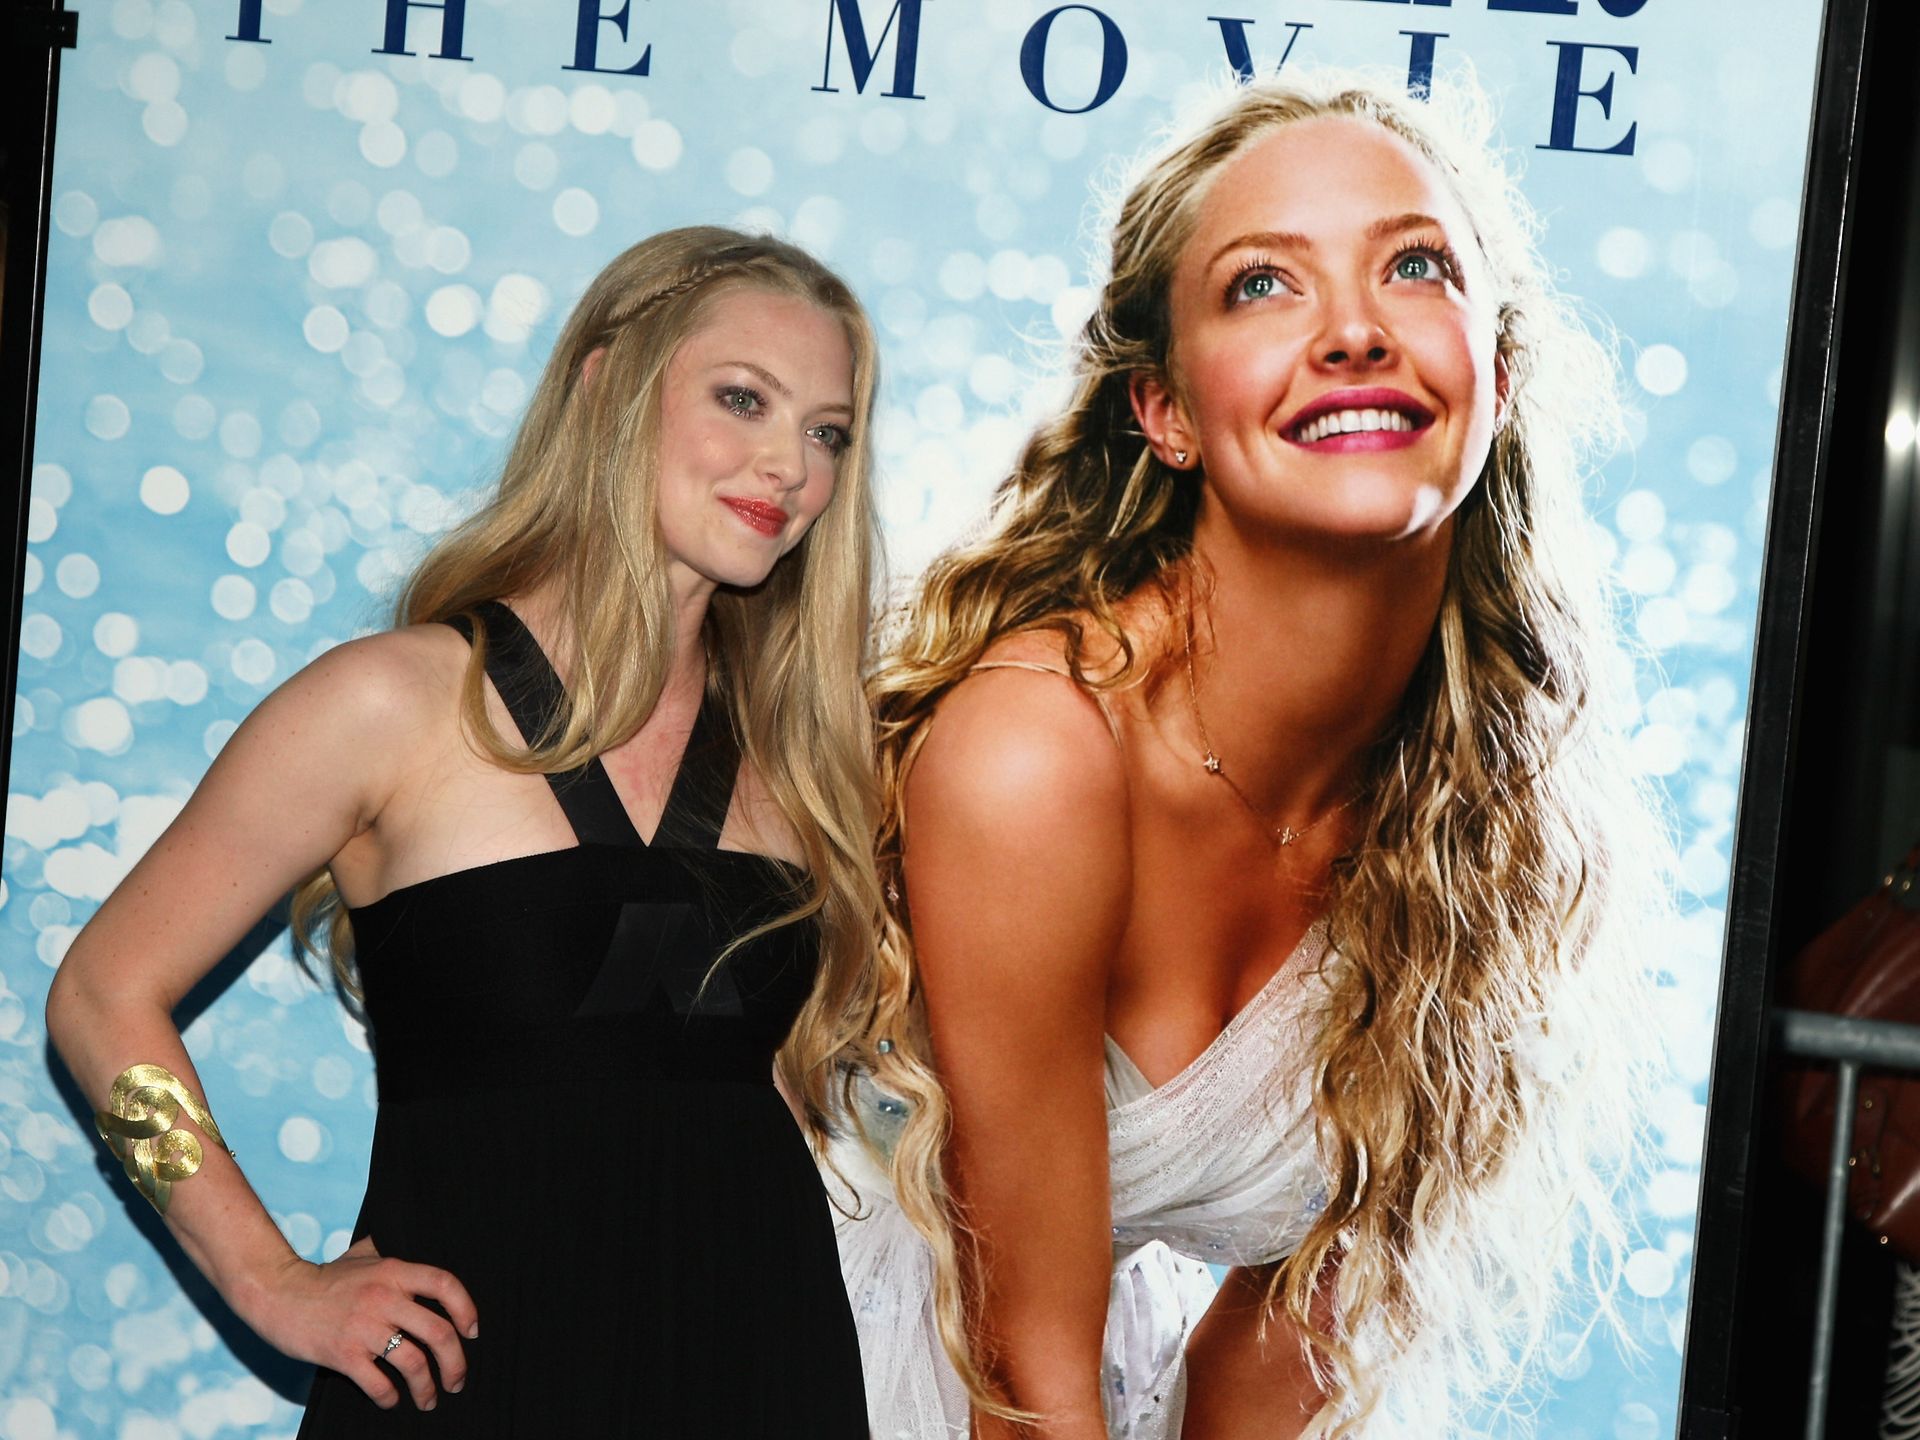 Mamma Mia! is 15: The cast's best photos and what they've said